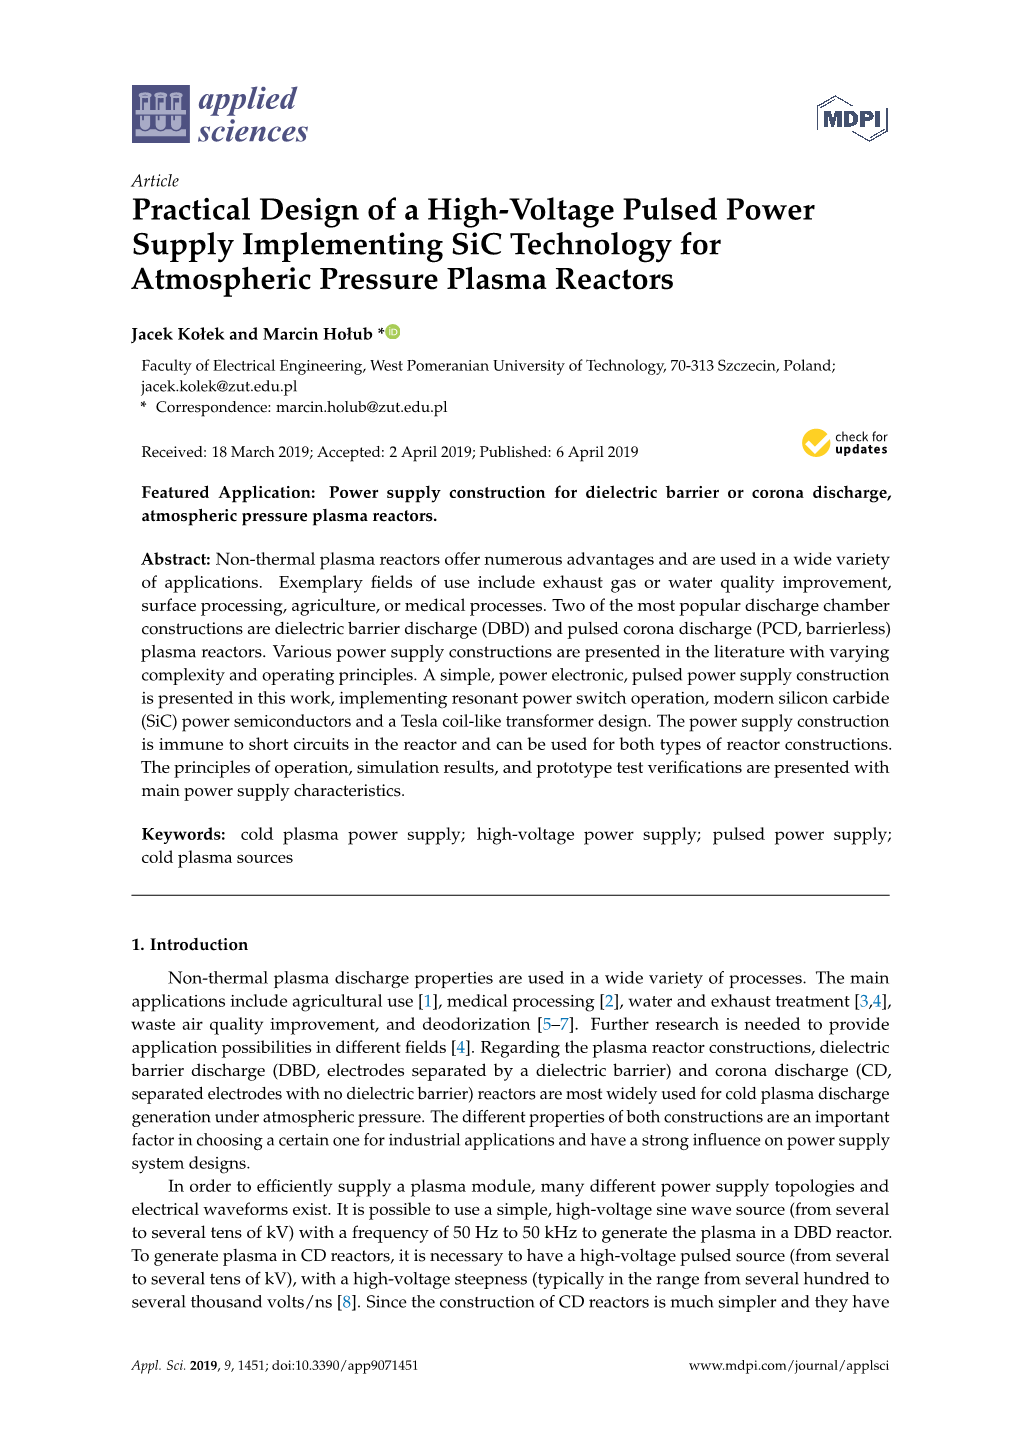 Practical Design of a High-Voltage Pulsed Power Supply Implementing Sic Technology for Atmospheric Pressure Plasma Reactors